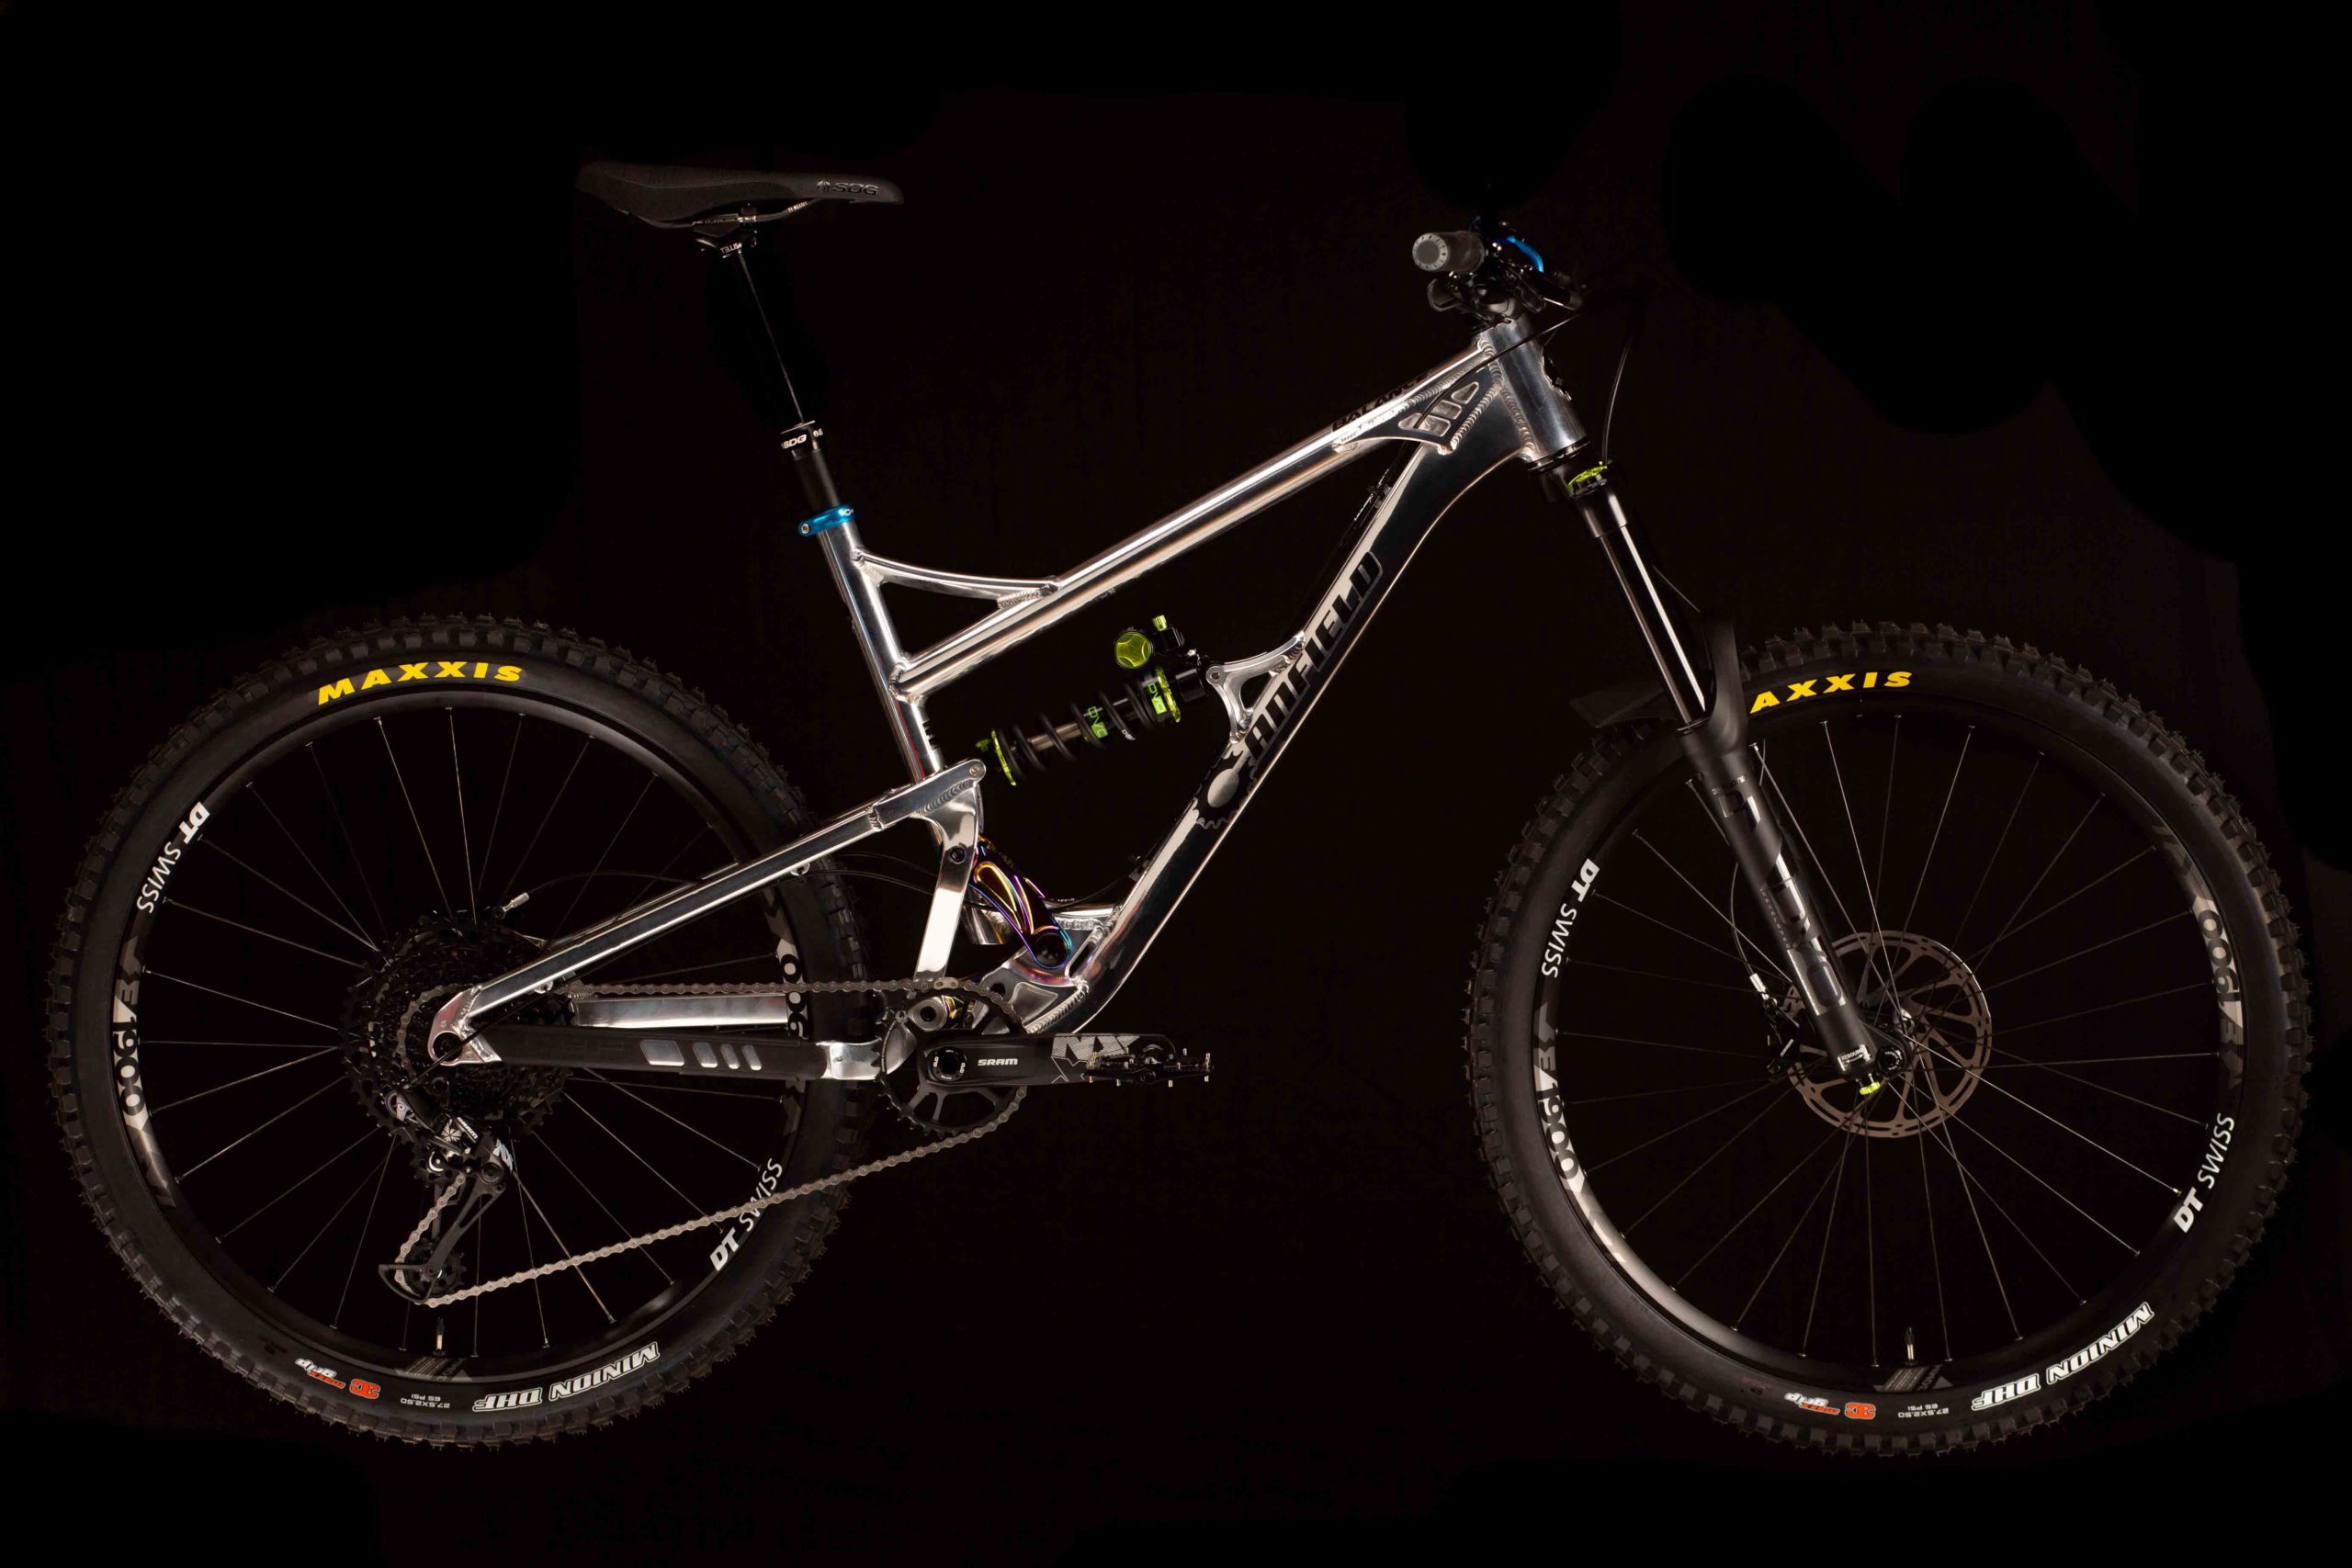 Canfield Balance is back w/ Limited Edition 2020 build with polished frame & oil slick links